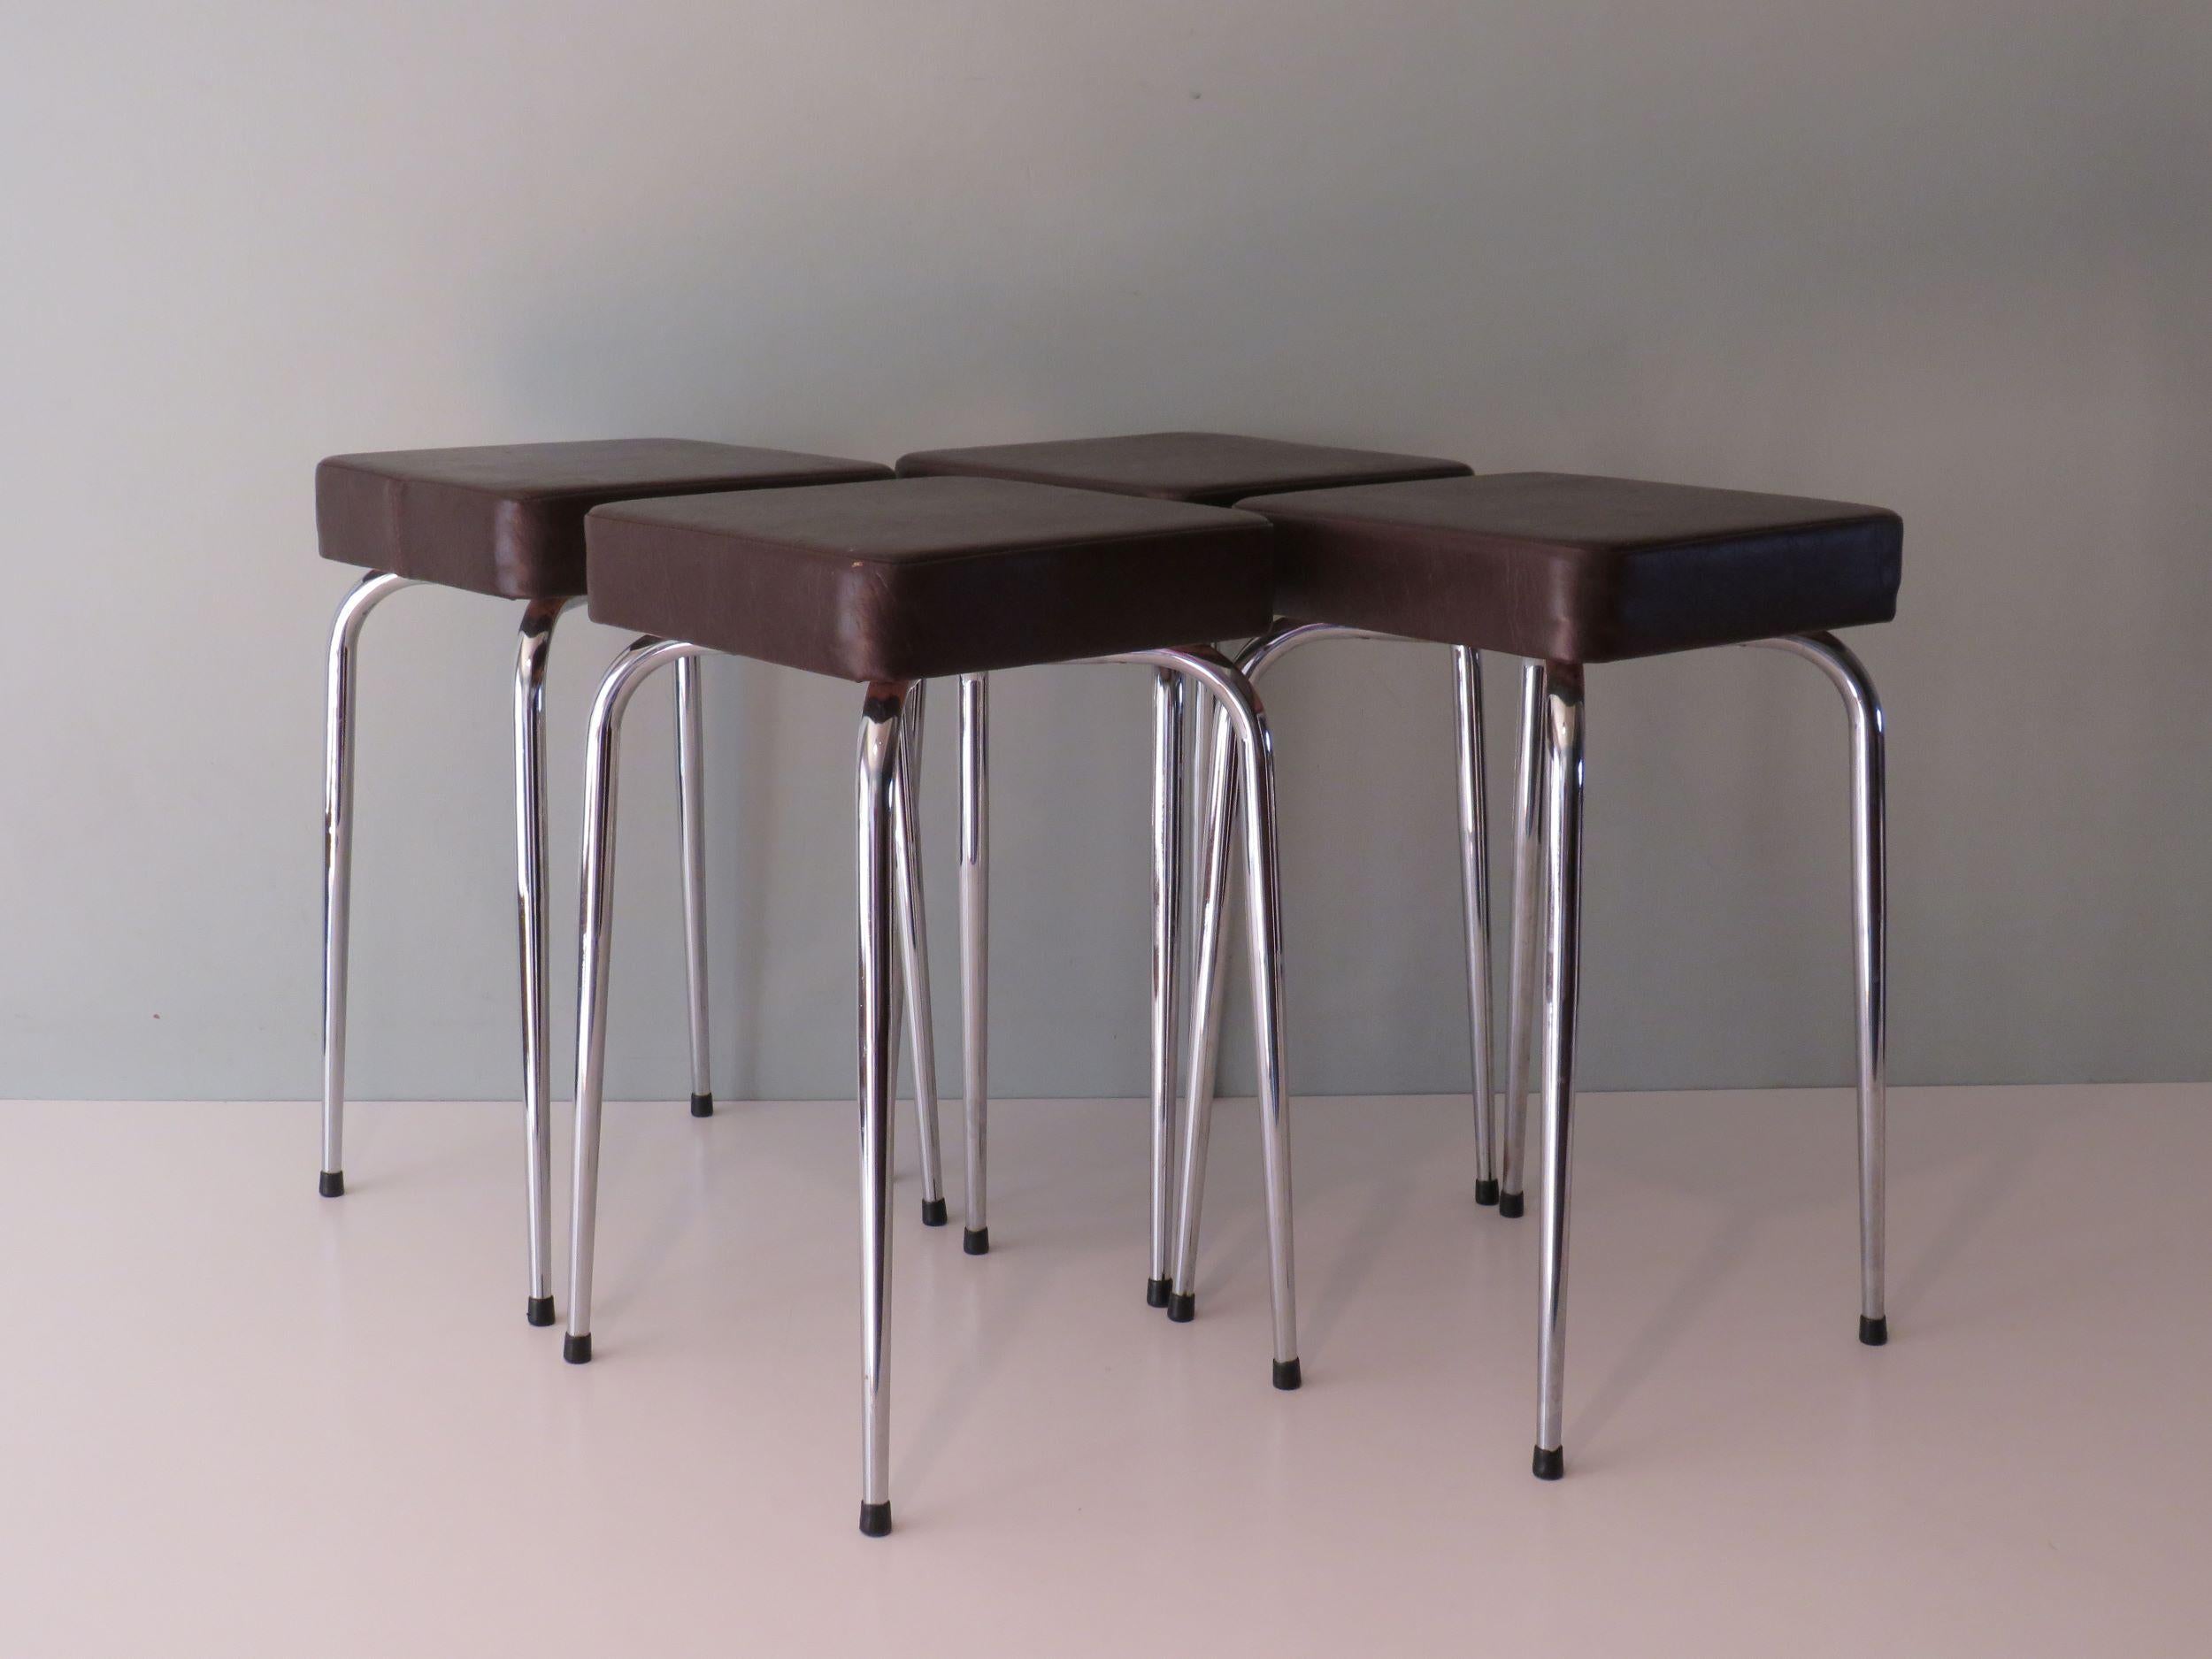 Space Age Set of 4 Stools, Chrome and Skai by Poelux, Belgium, 1960-1970 For Sale